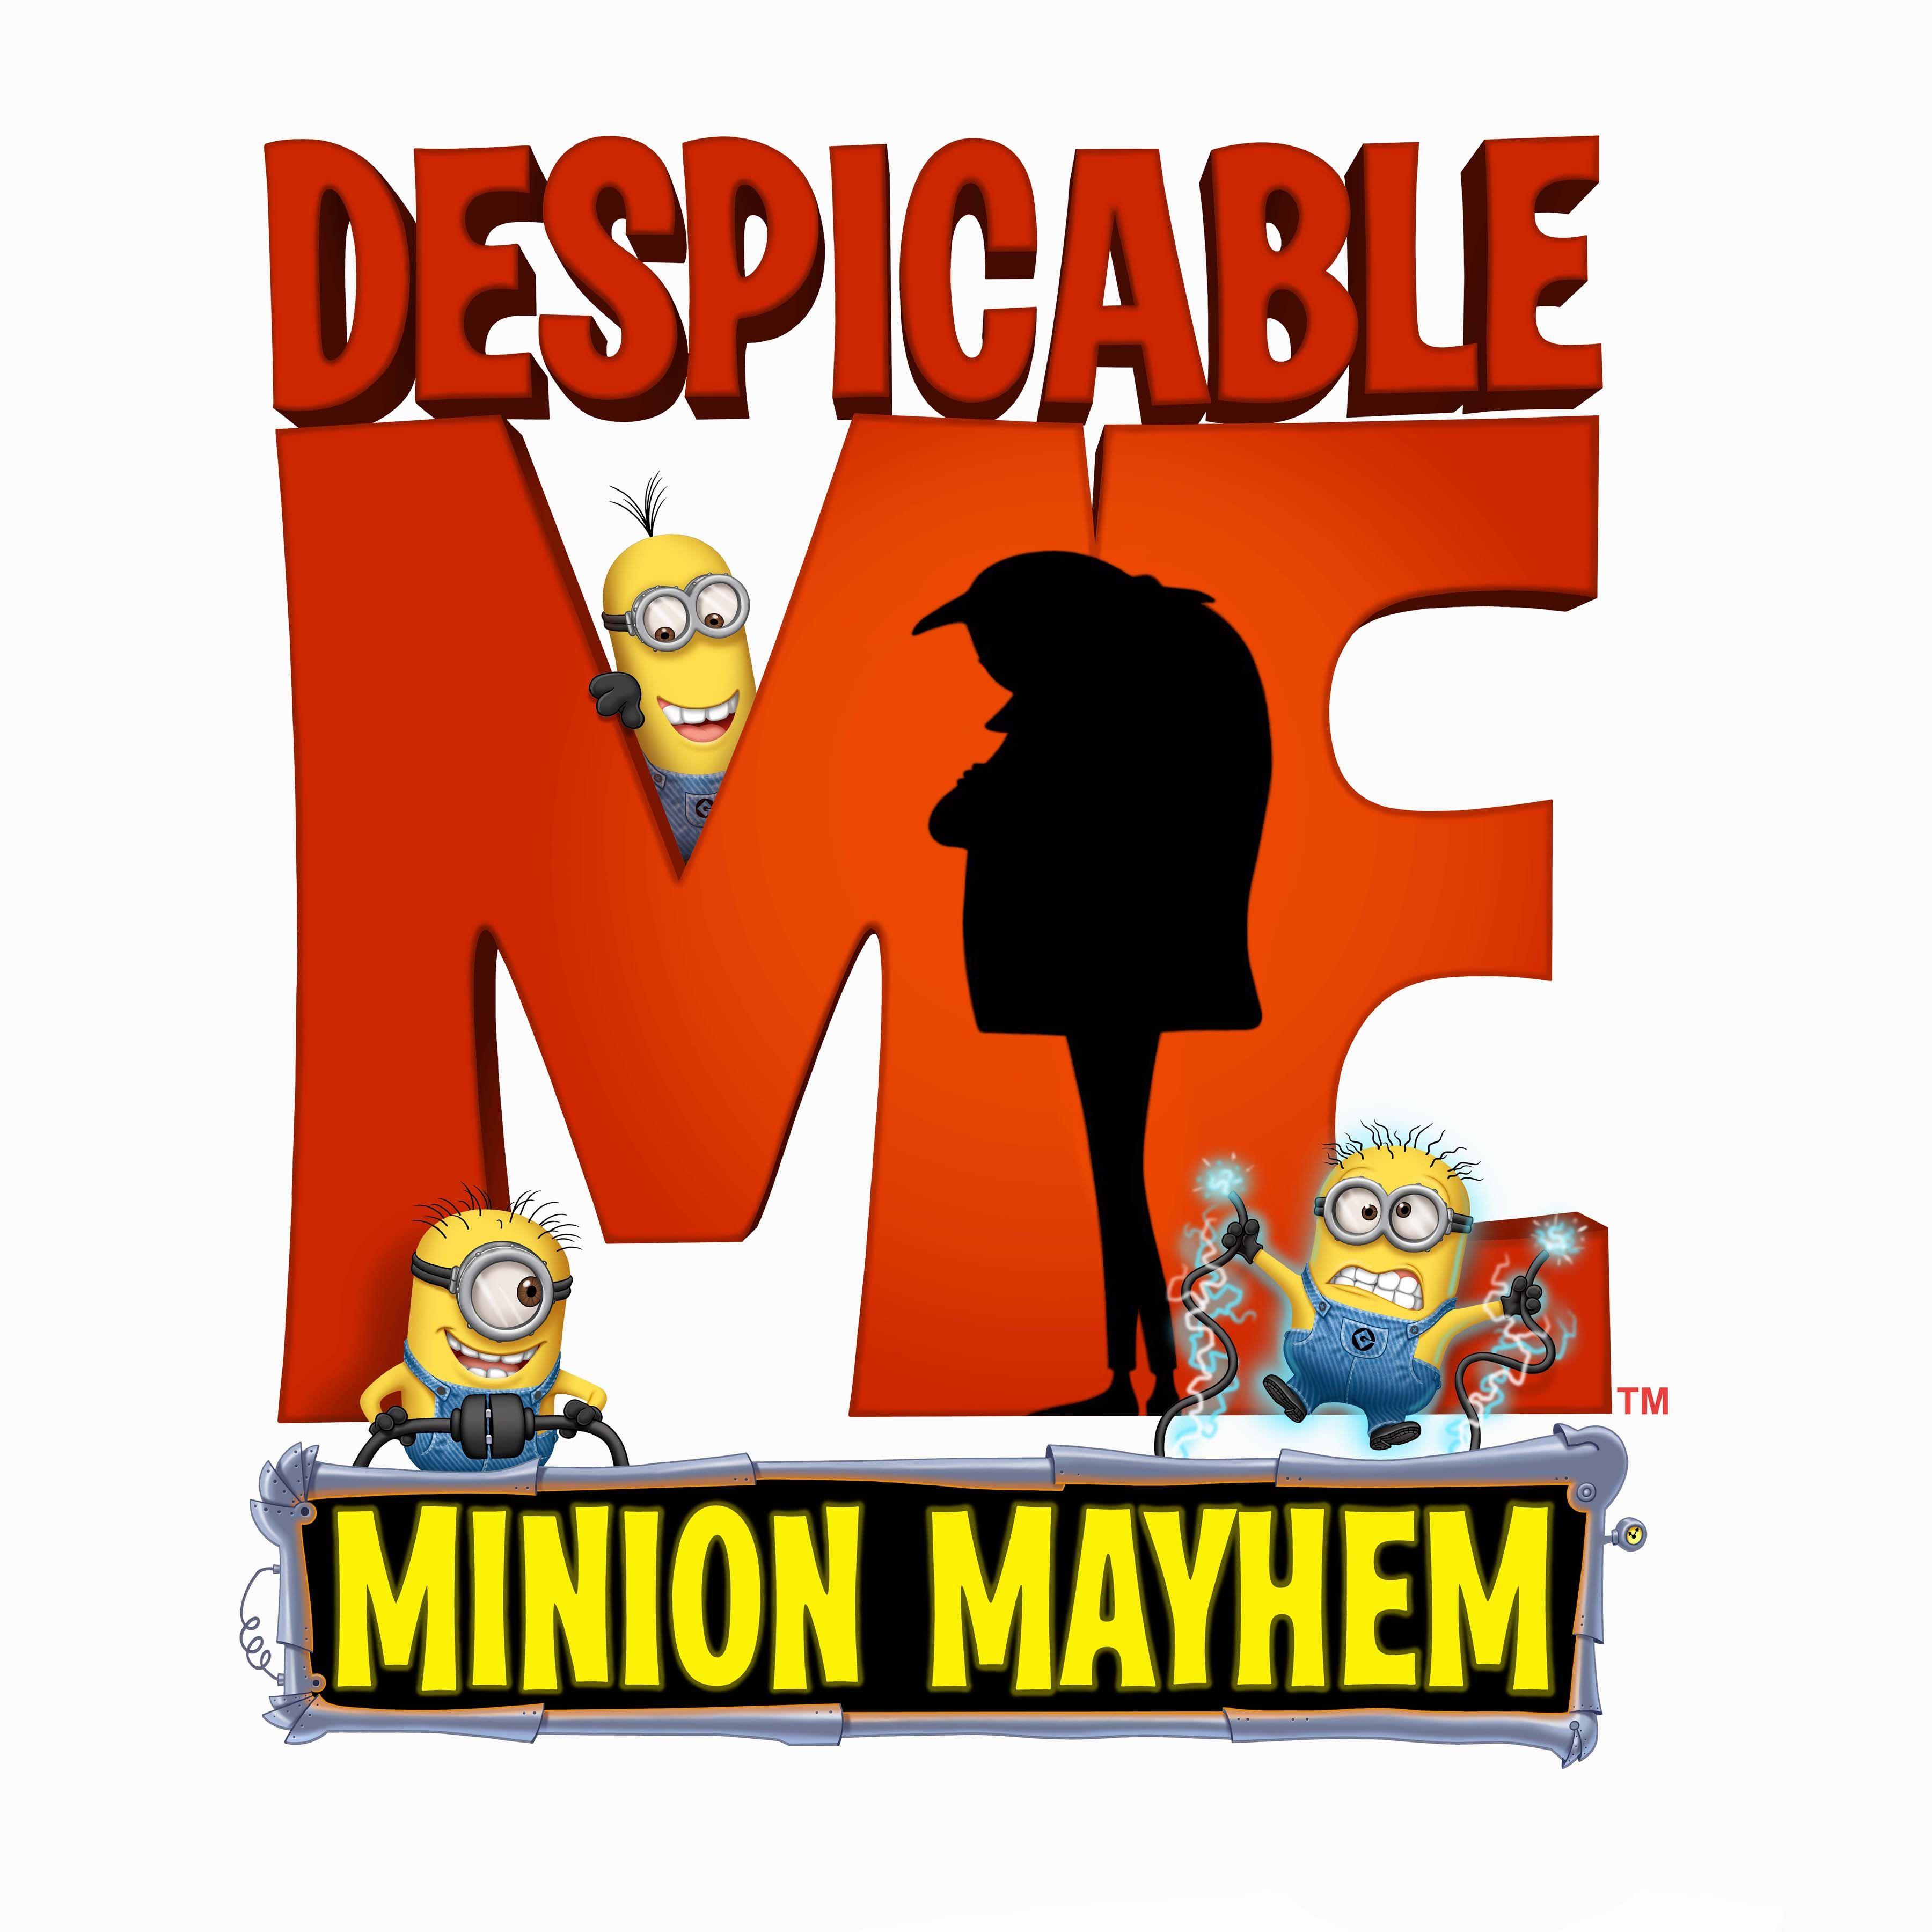 Despicable Me 1 Logo - Despicable Me Minion Mayhem Logo. BEYOND THE MARQUEE